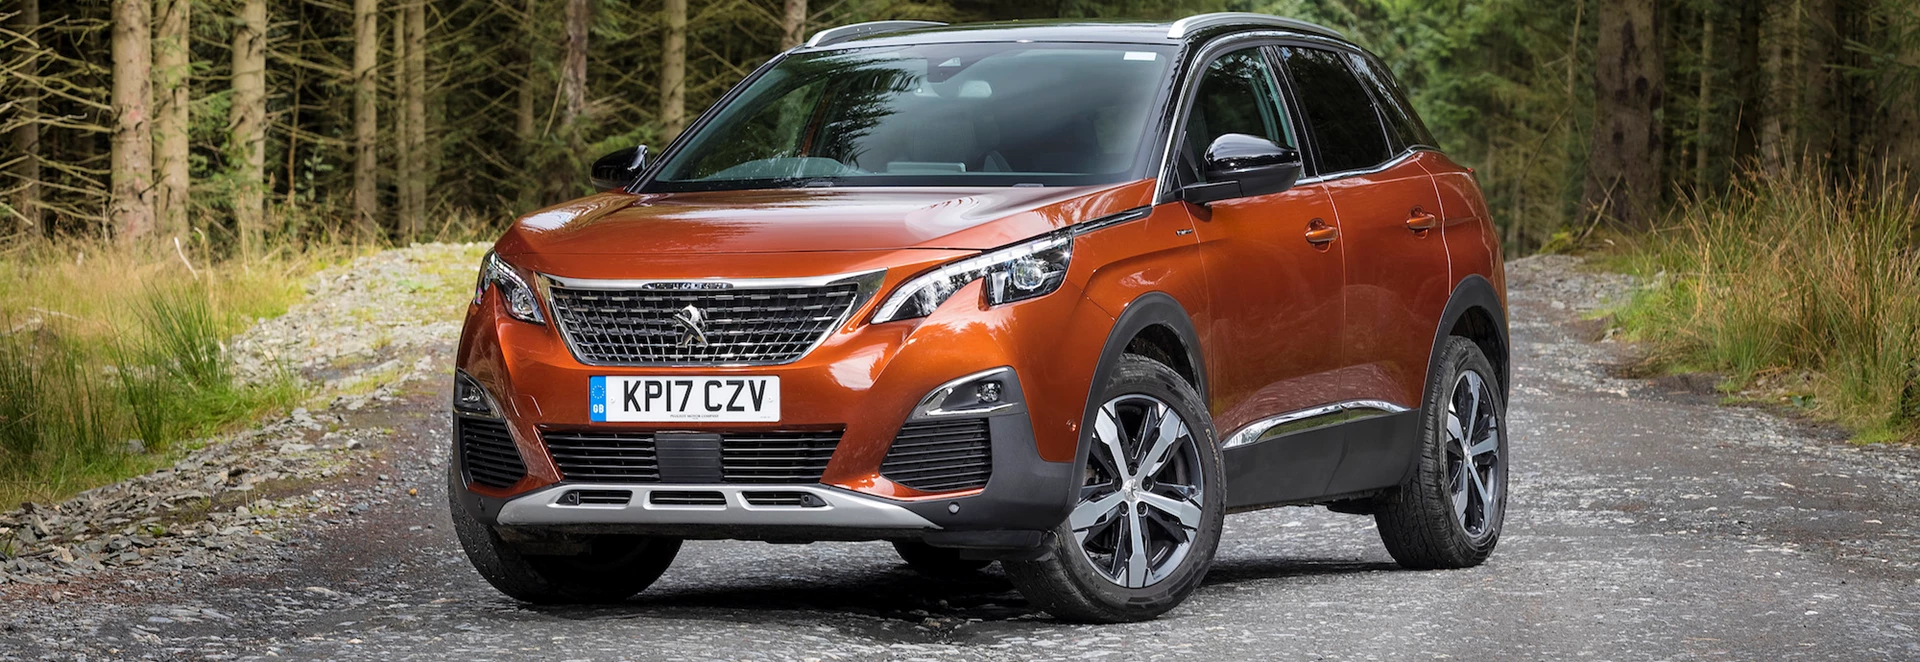 Peugeot 3008 wins gold in Auto Express Driver Power awards